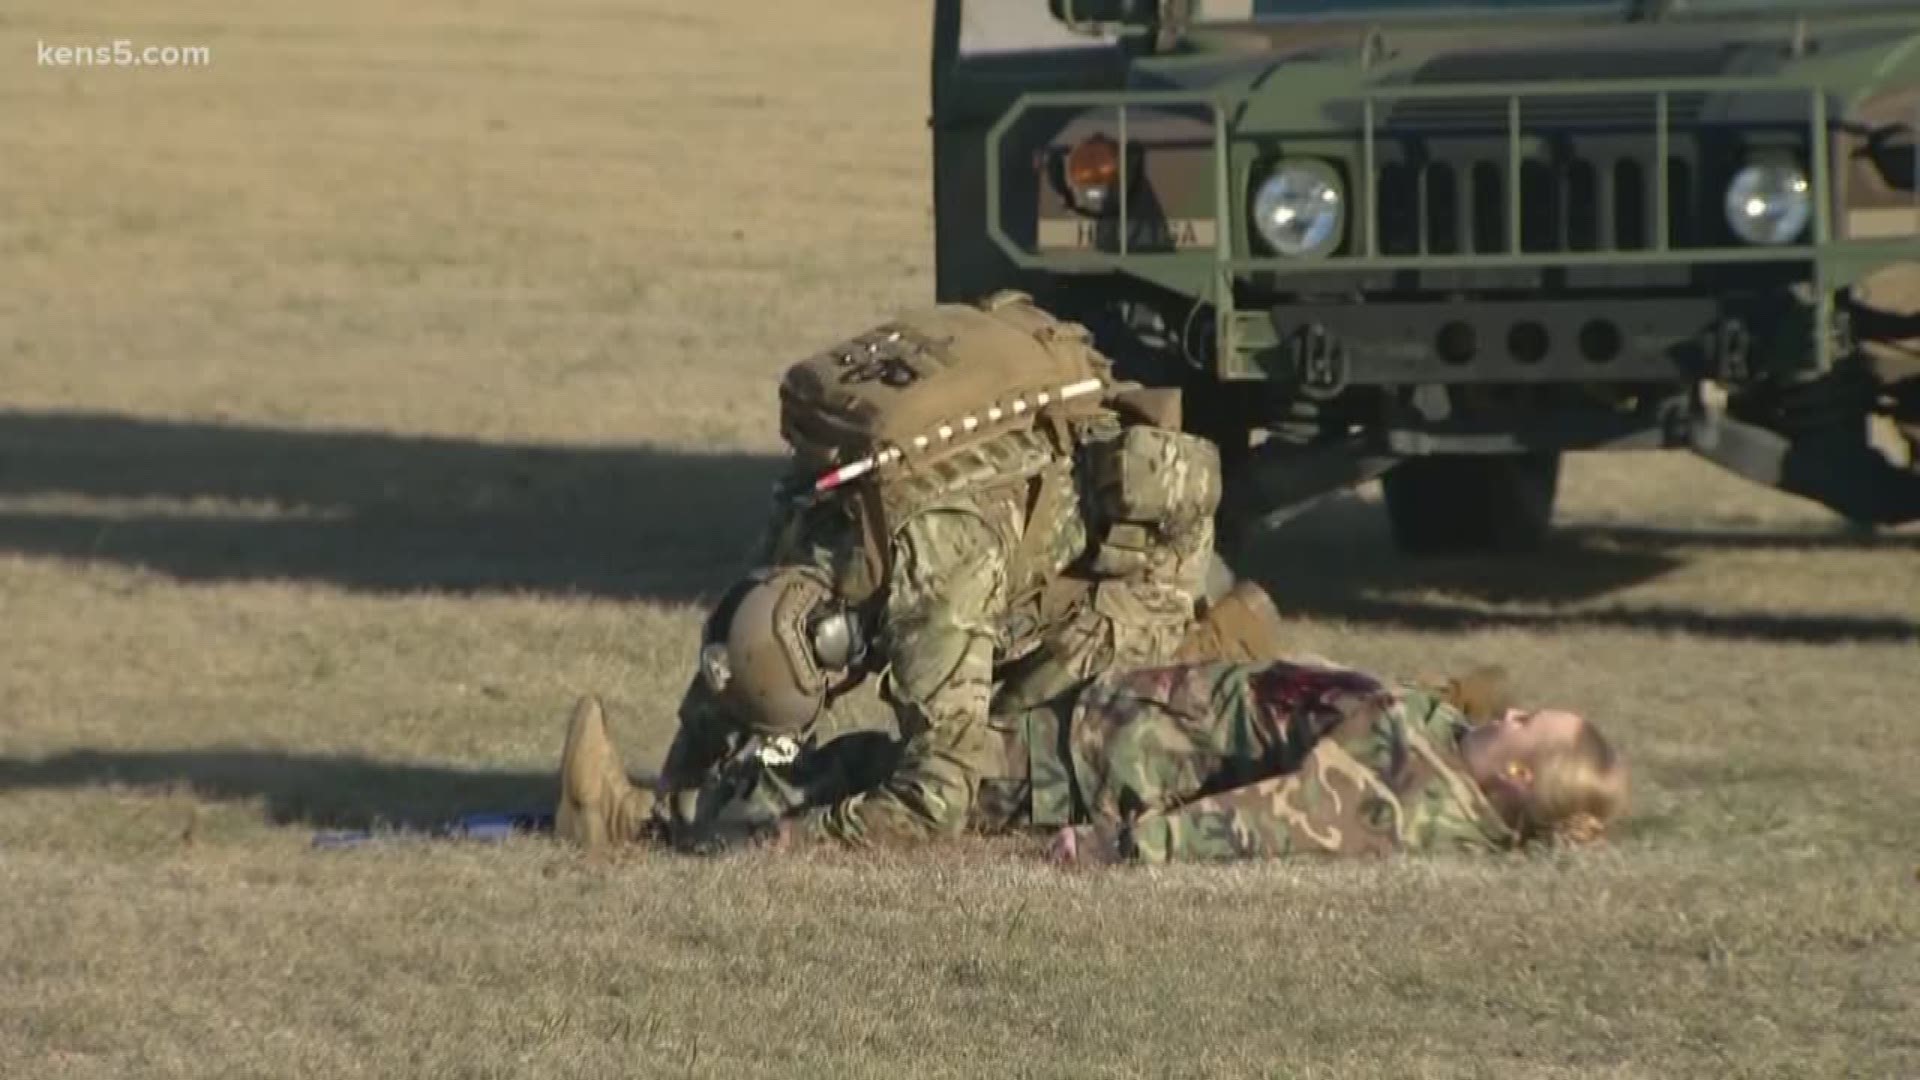 The U.S. Army held a Medevac demonstration at Fort Sam Houston to give insight into what it takes to be a medical professional in the military.